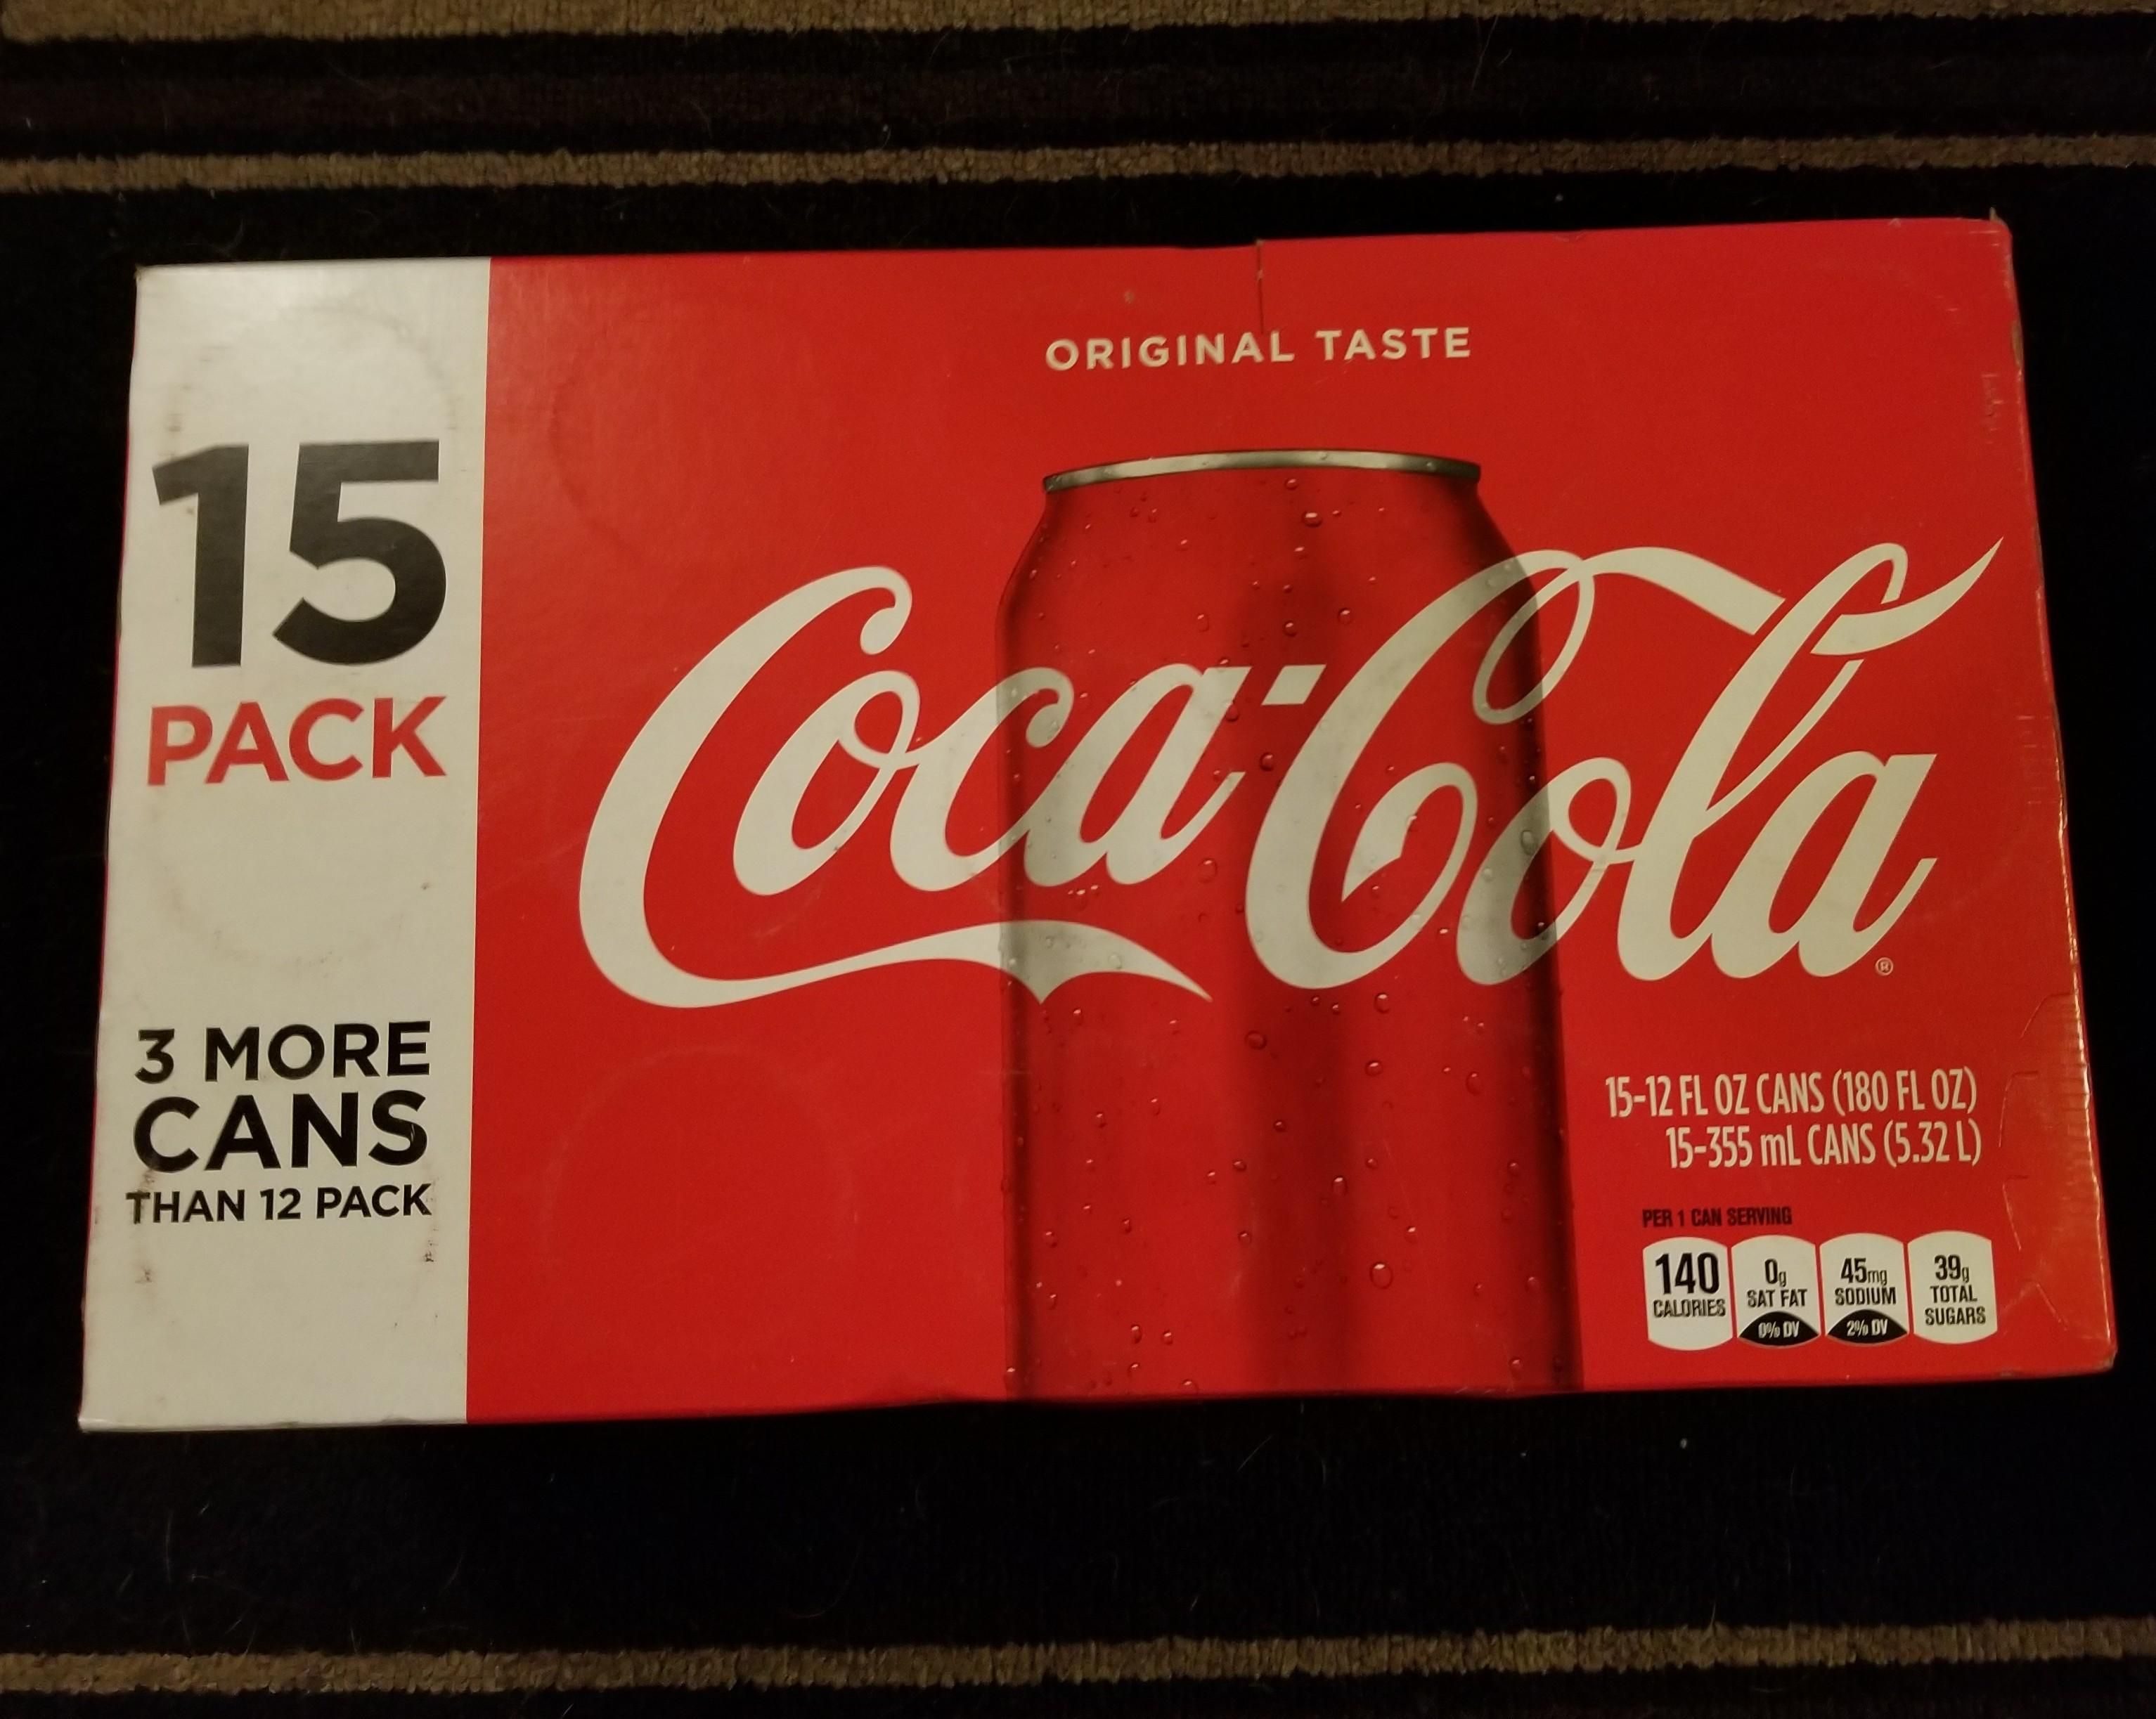 Coca-Cola's marketing team did the math for us!